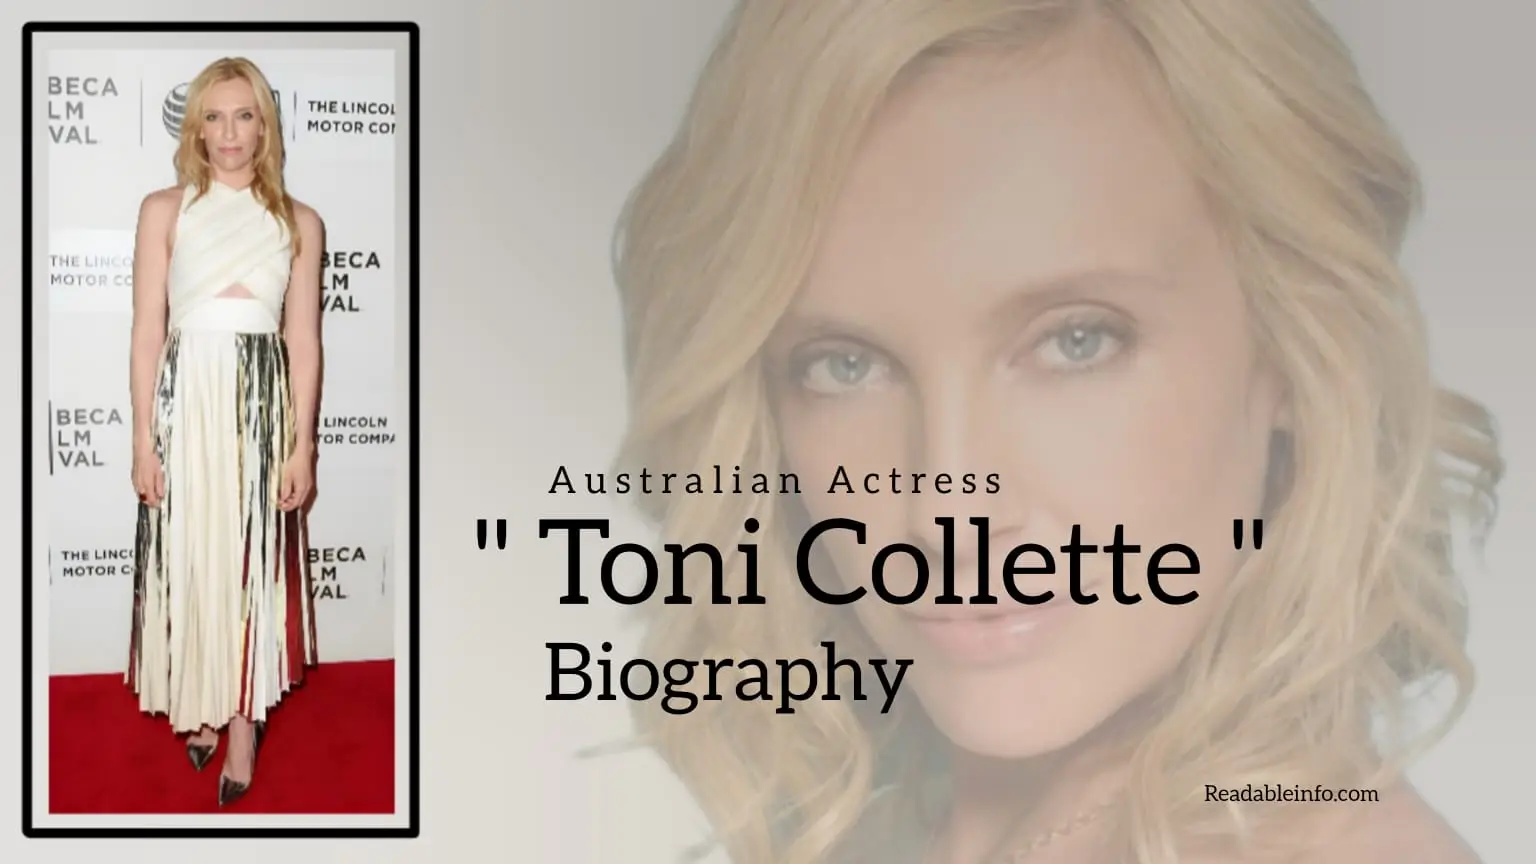 You are currently viewing Toni Collette Biography (Australian Actress)